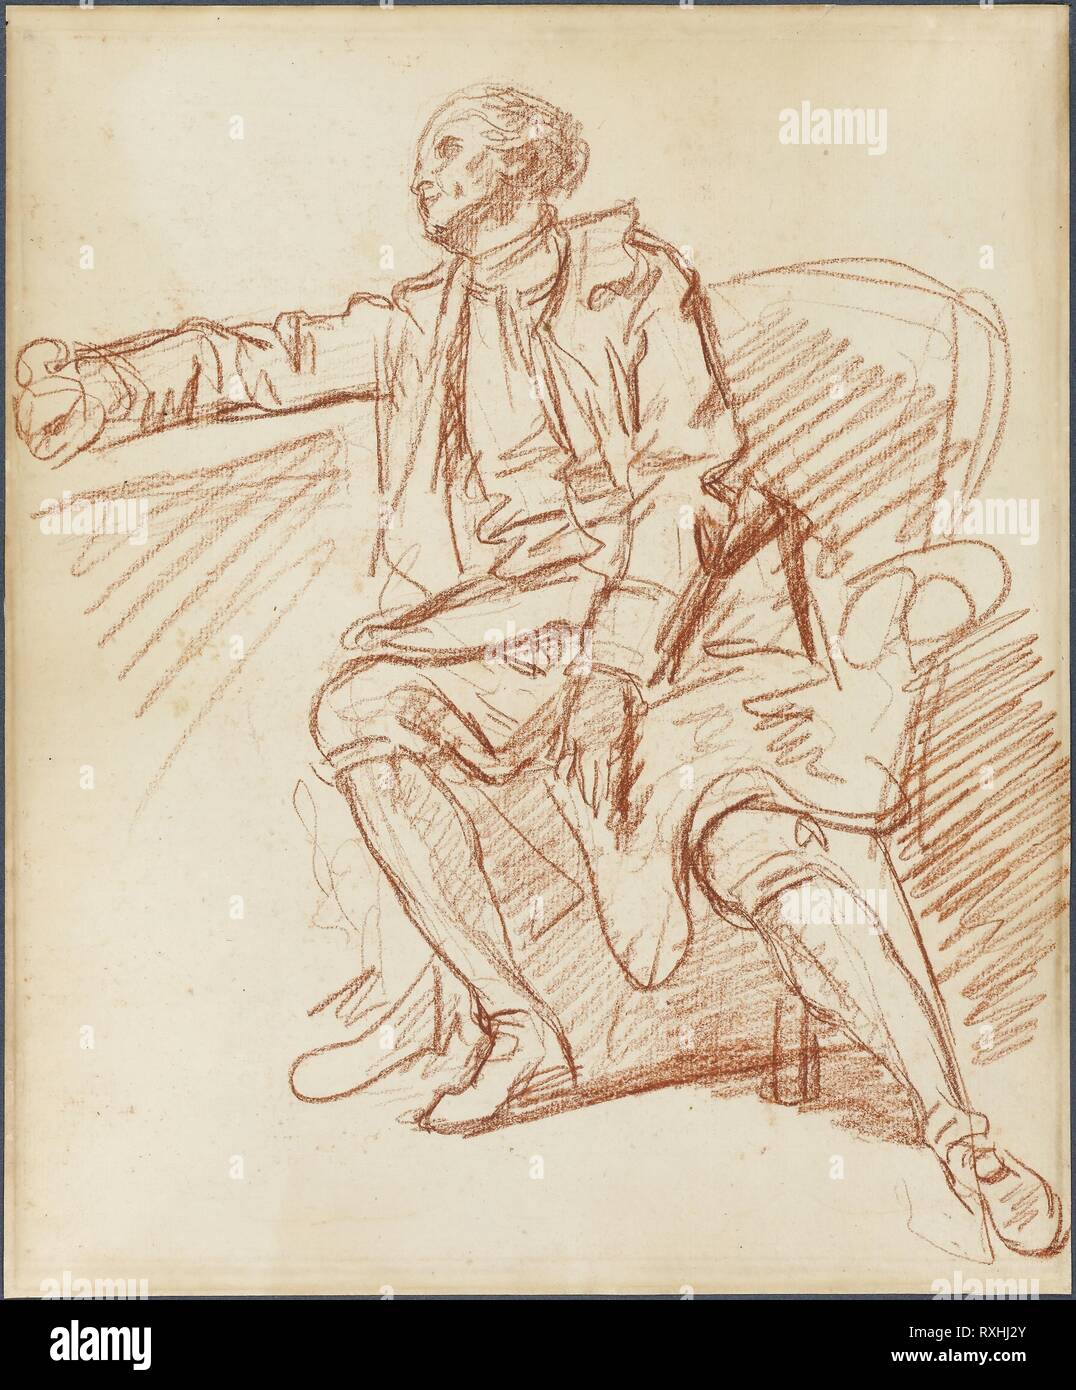 Seated Gentleman. Jean-Baptiste Greuze; French, 1725-1805. Date: 1764-1774. Dimensions: 392 × 325 mm. Red chalk on ivory laid paper. Origin: France. Museum: The Chicago Art Institute. Stock Photo